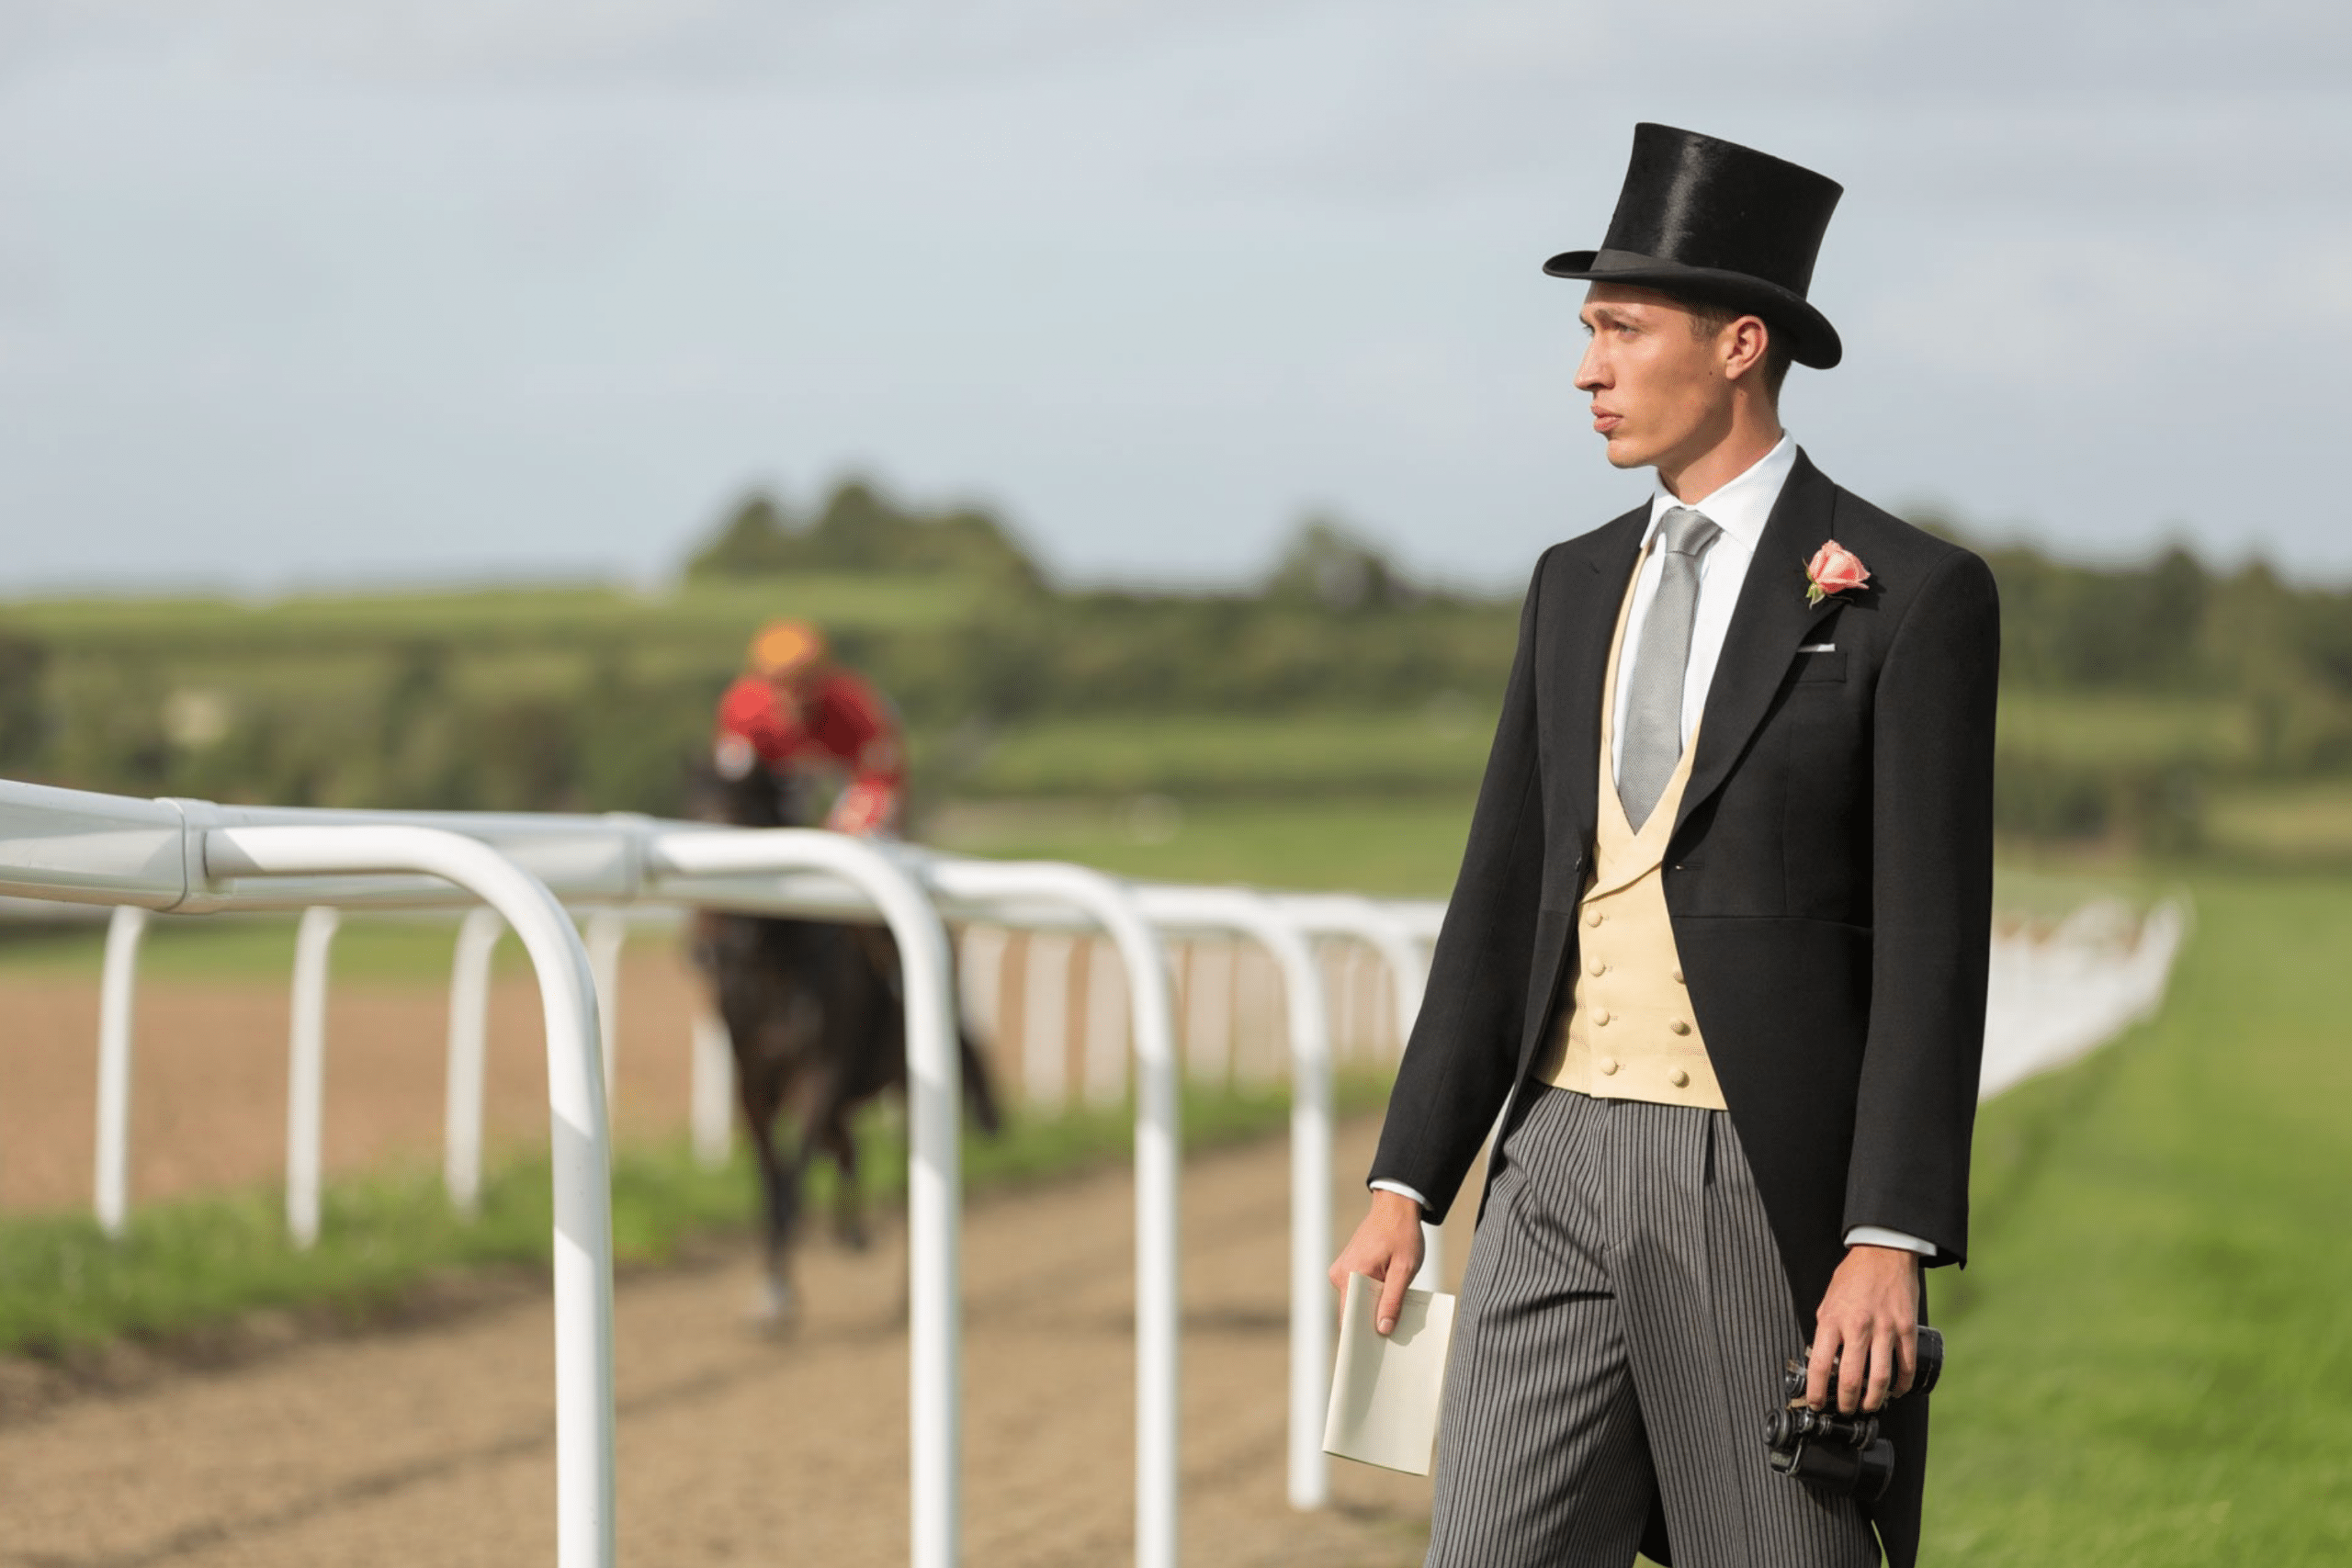 A dapper gentleman epitomizing the Guide to Race Day Attire, stands poised at the racetrack in a bespoke morning suit with a top hat, symbolizing sartorial race day elegance.